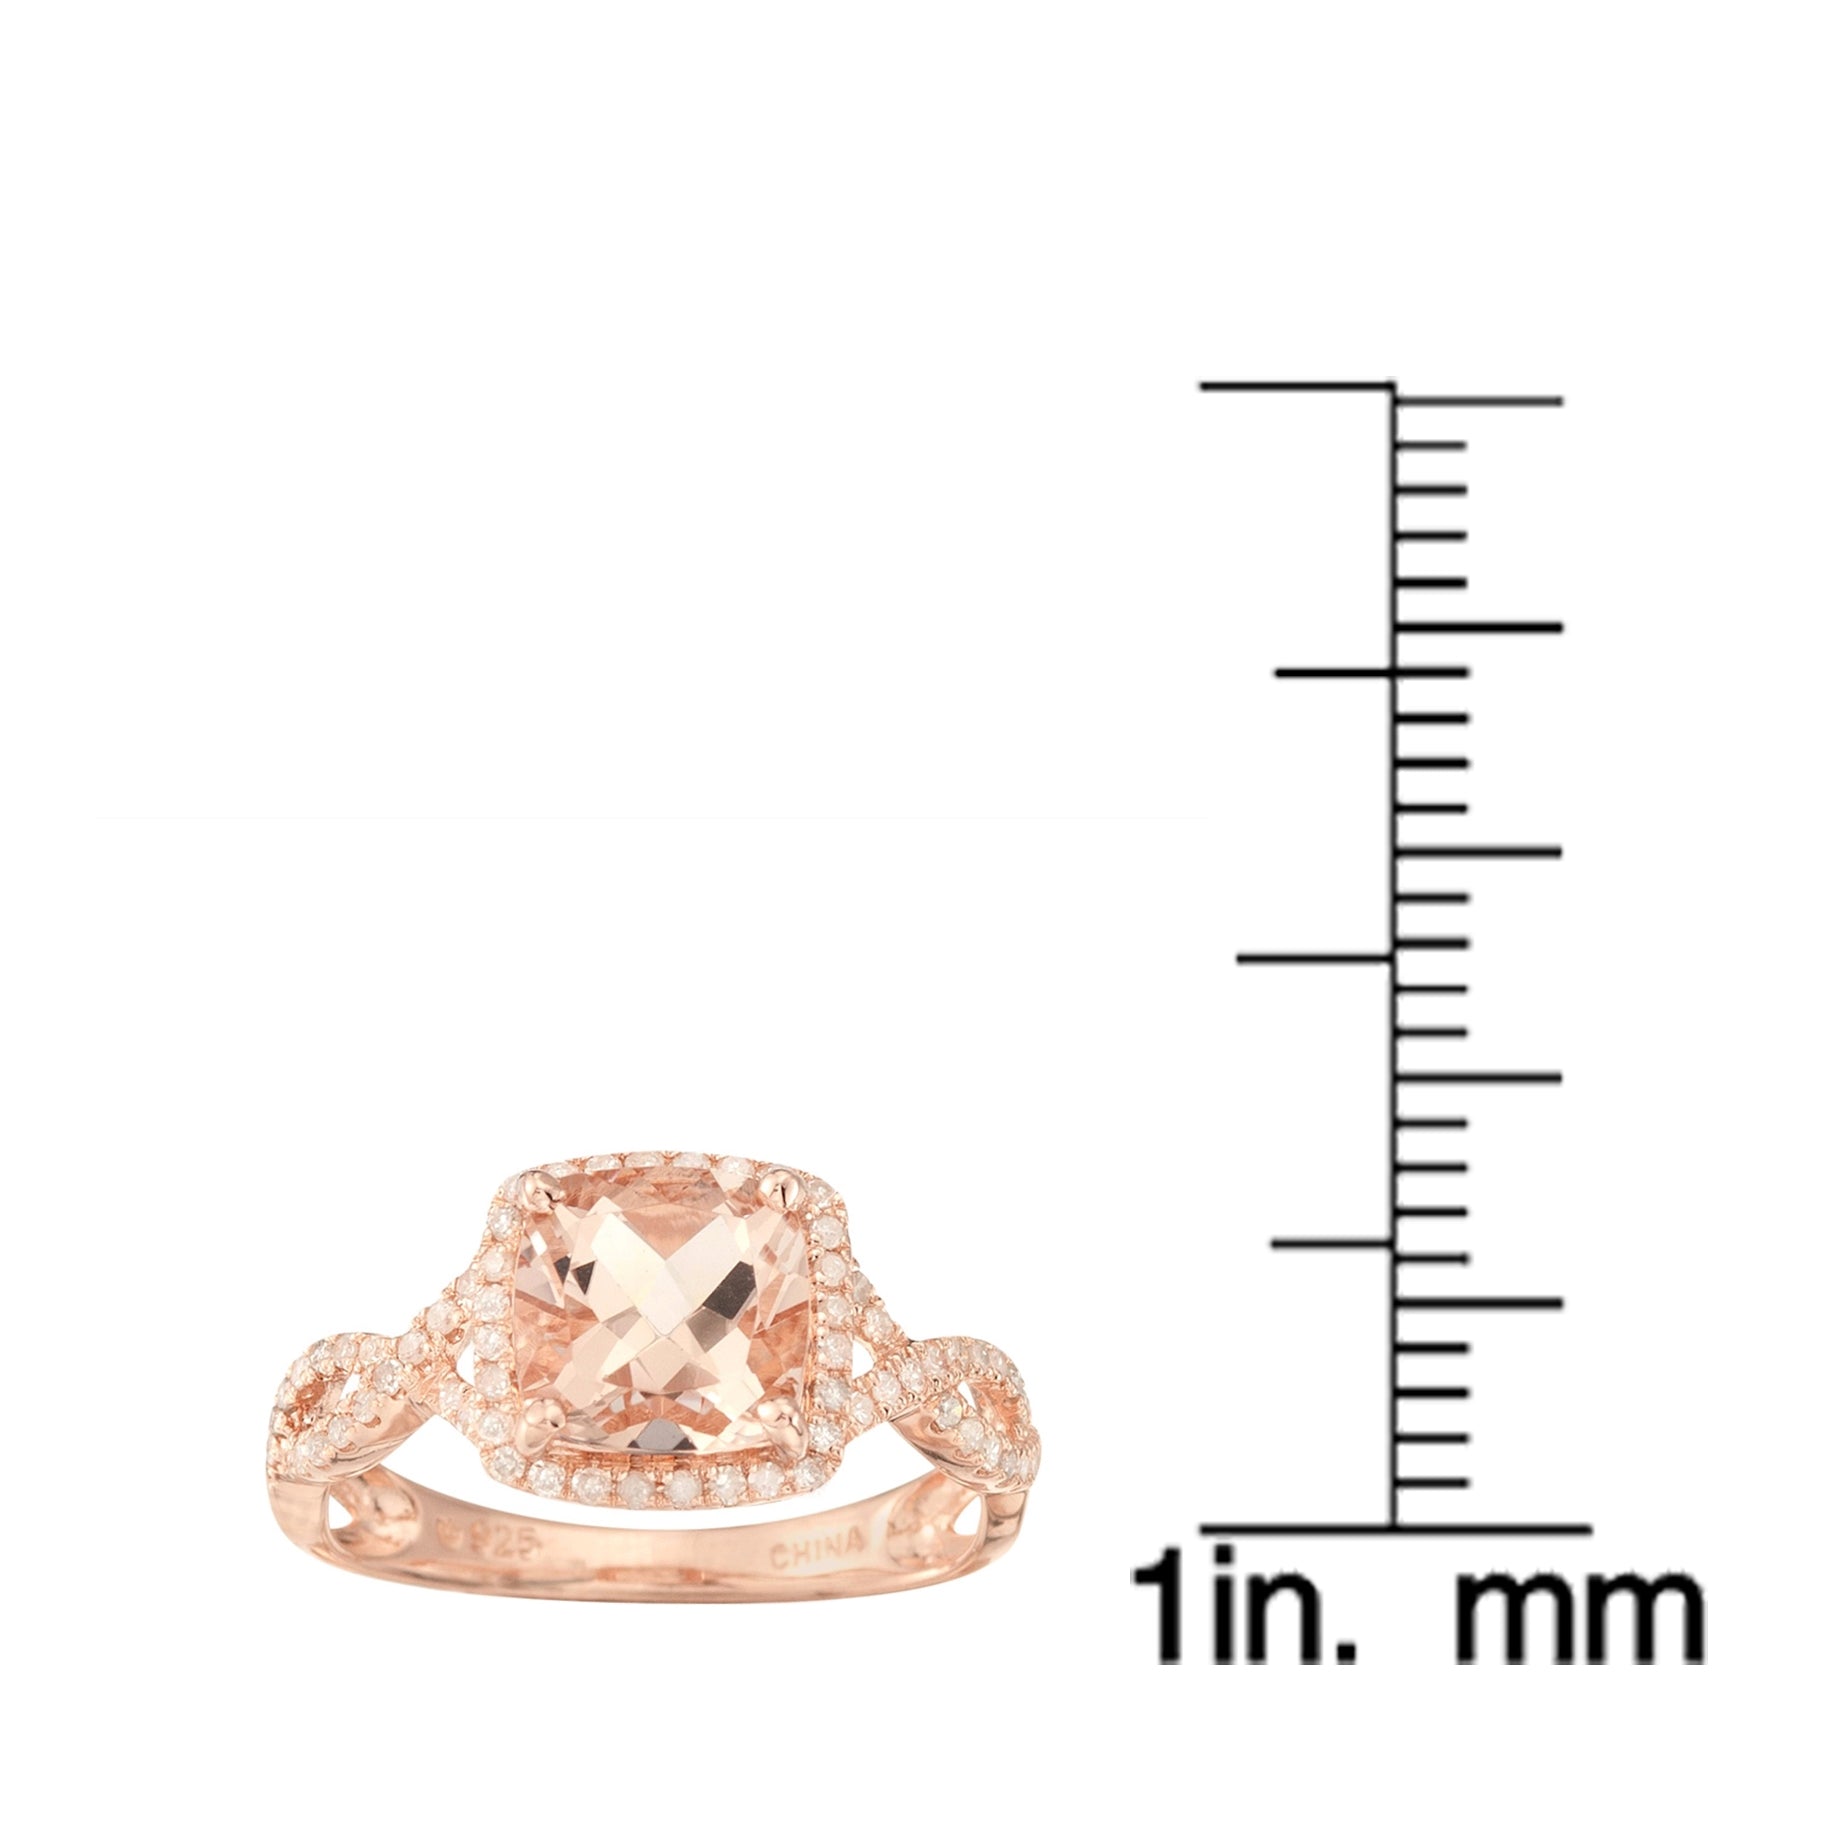 14k Rose Gold Morganite and Diamond Cushion Infinity Shank Engagement Ring (1/4cttw, H-I Color, SI1-SI2 Clarity), - pinctore